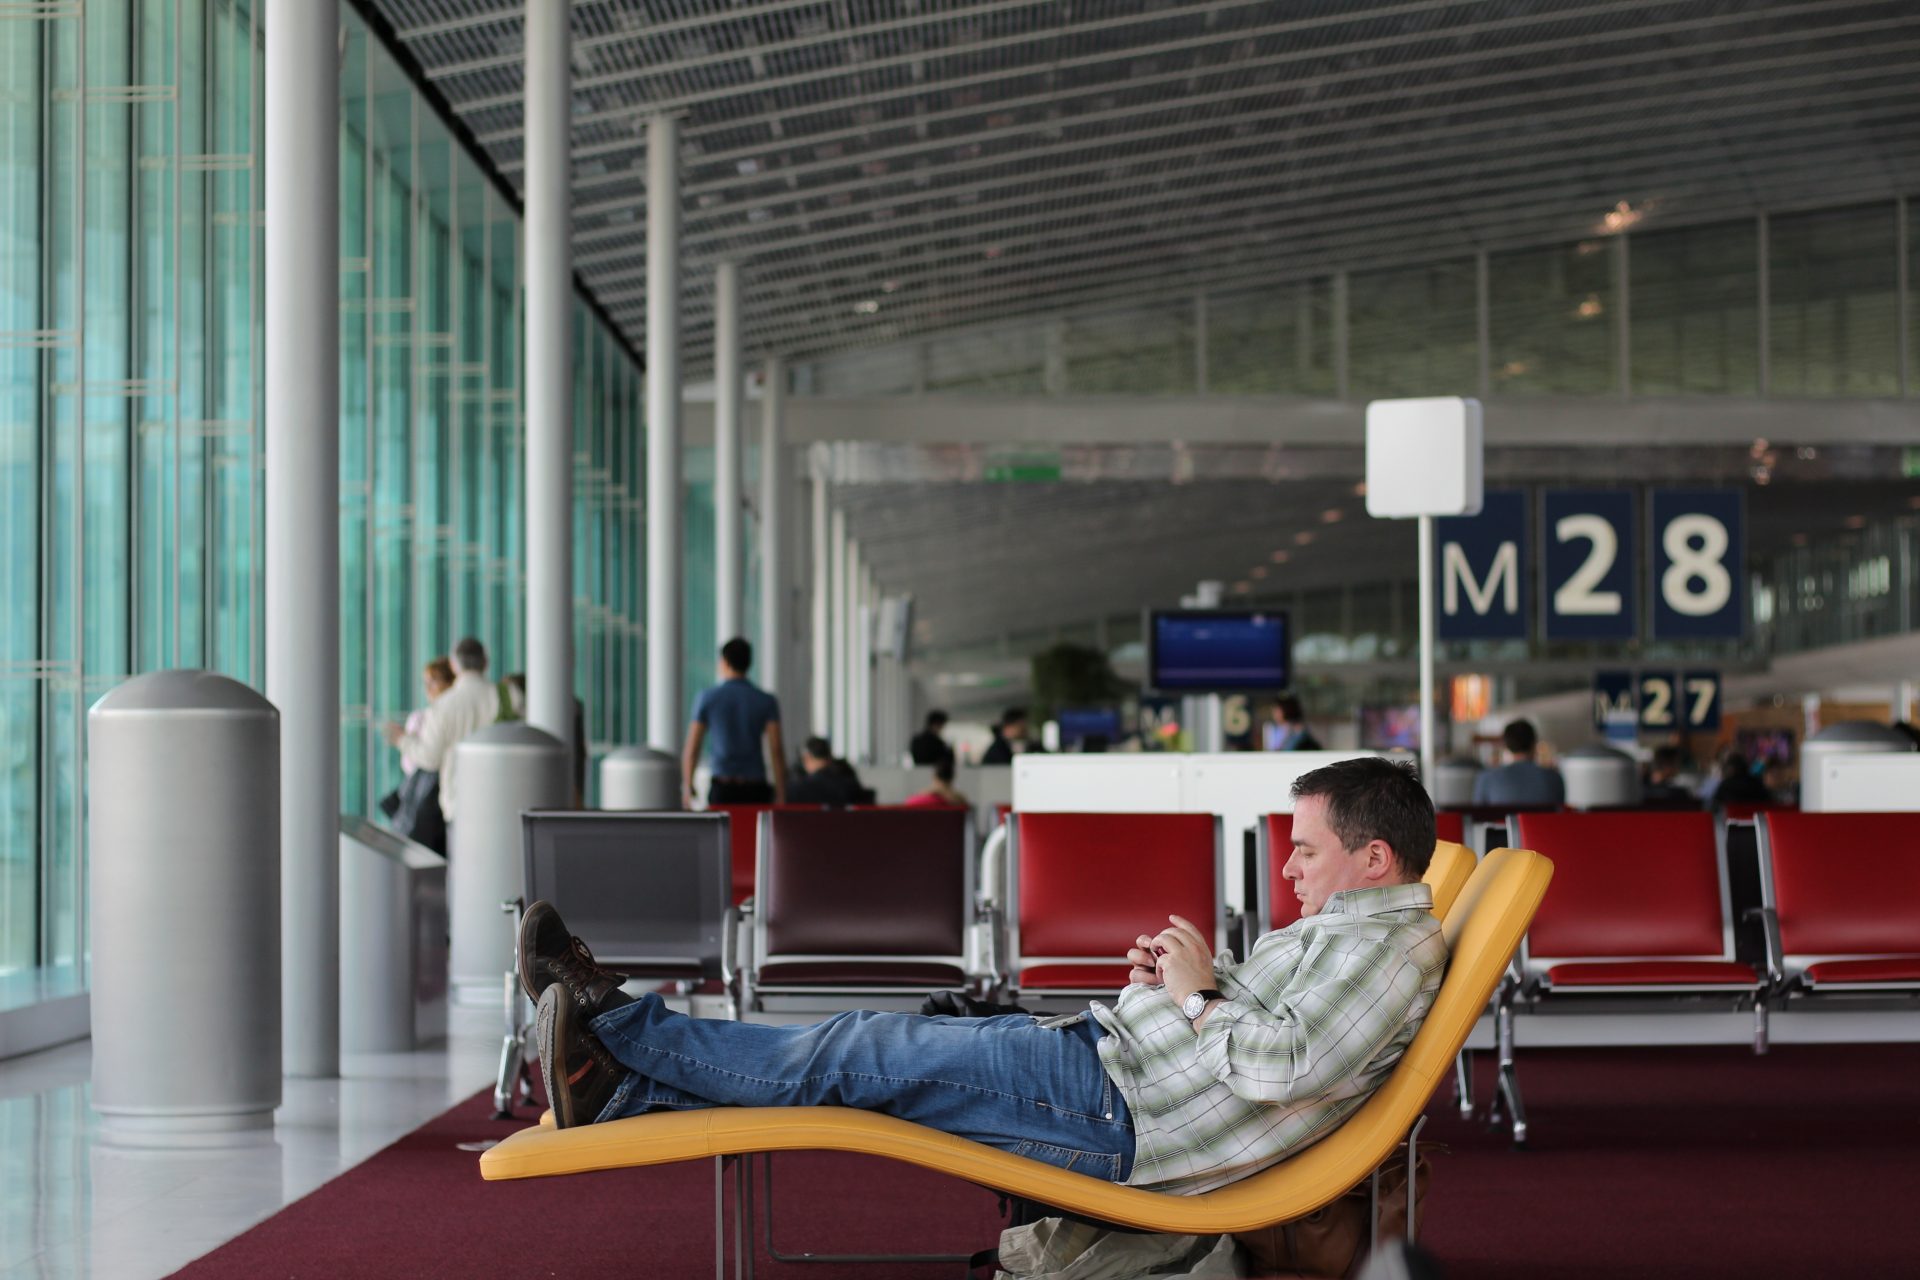 Man reclining at airport waiting area, checking phone for flight delays